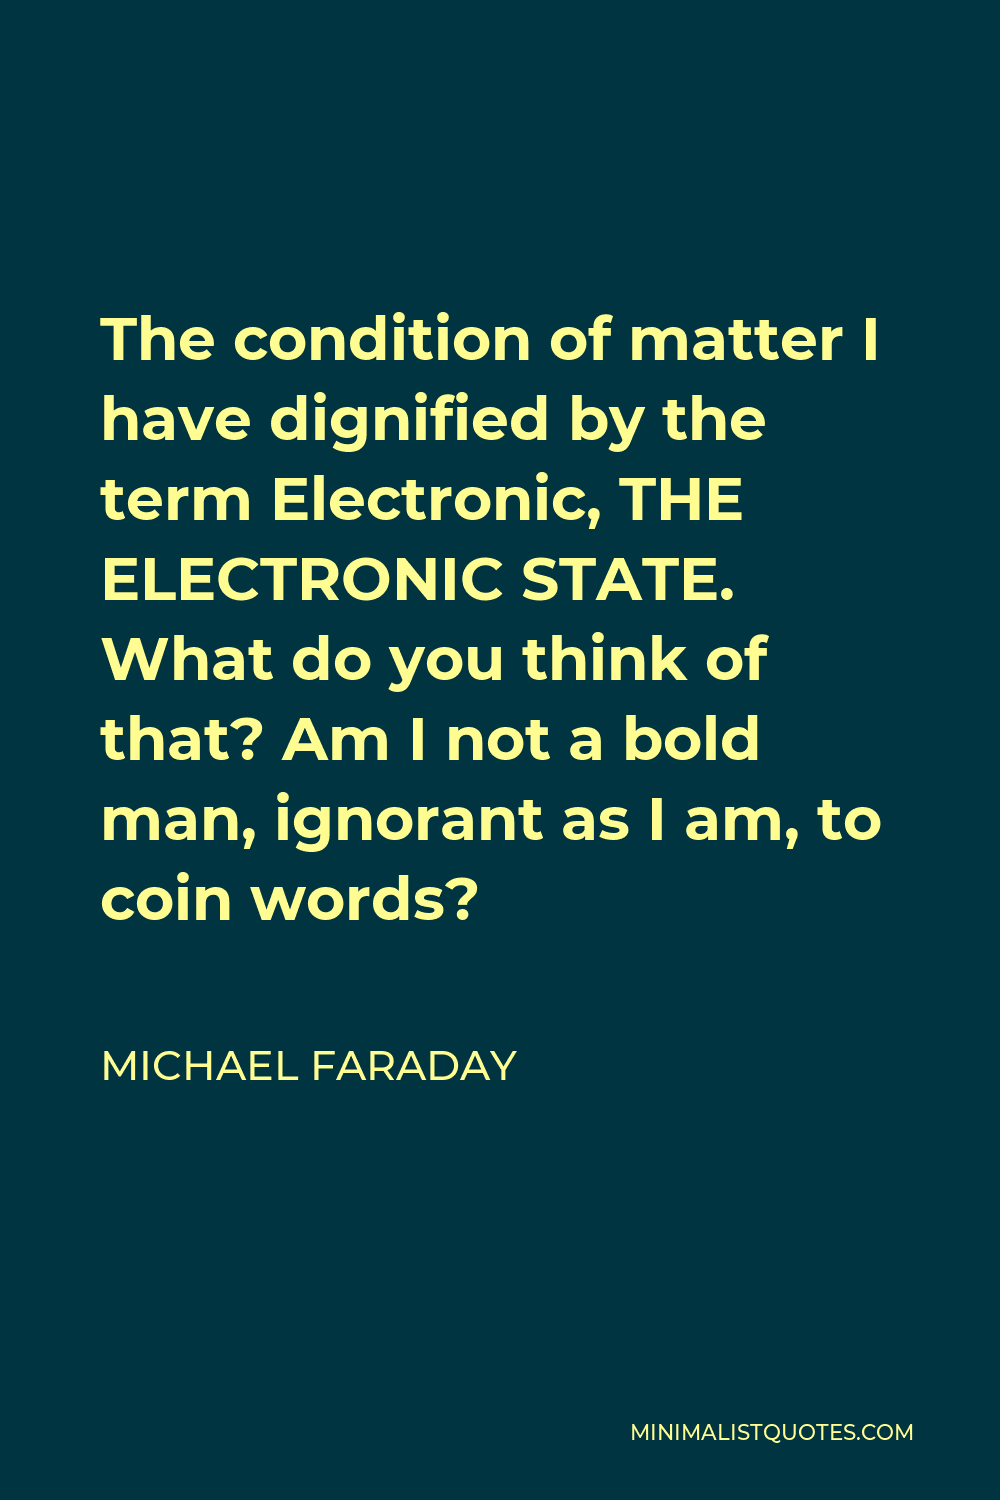 Michael Faraday Quote - The condition of matter I have dignified by the term Electronic, THE ELECTRONIC STATE. What do you think of that? Am I not a bold man, ignorant as I am, to coin words?